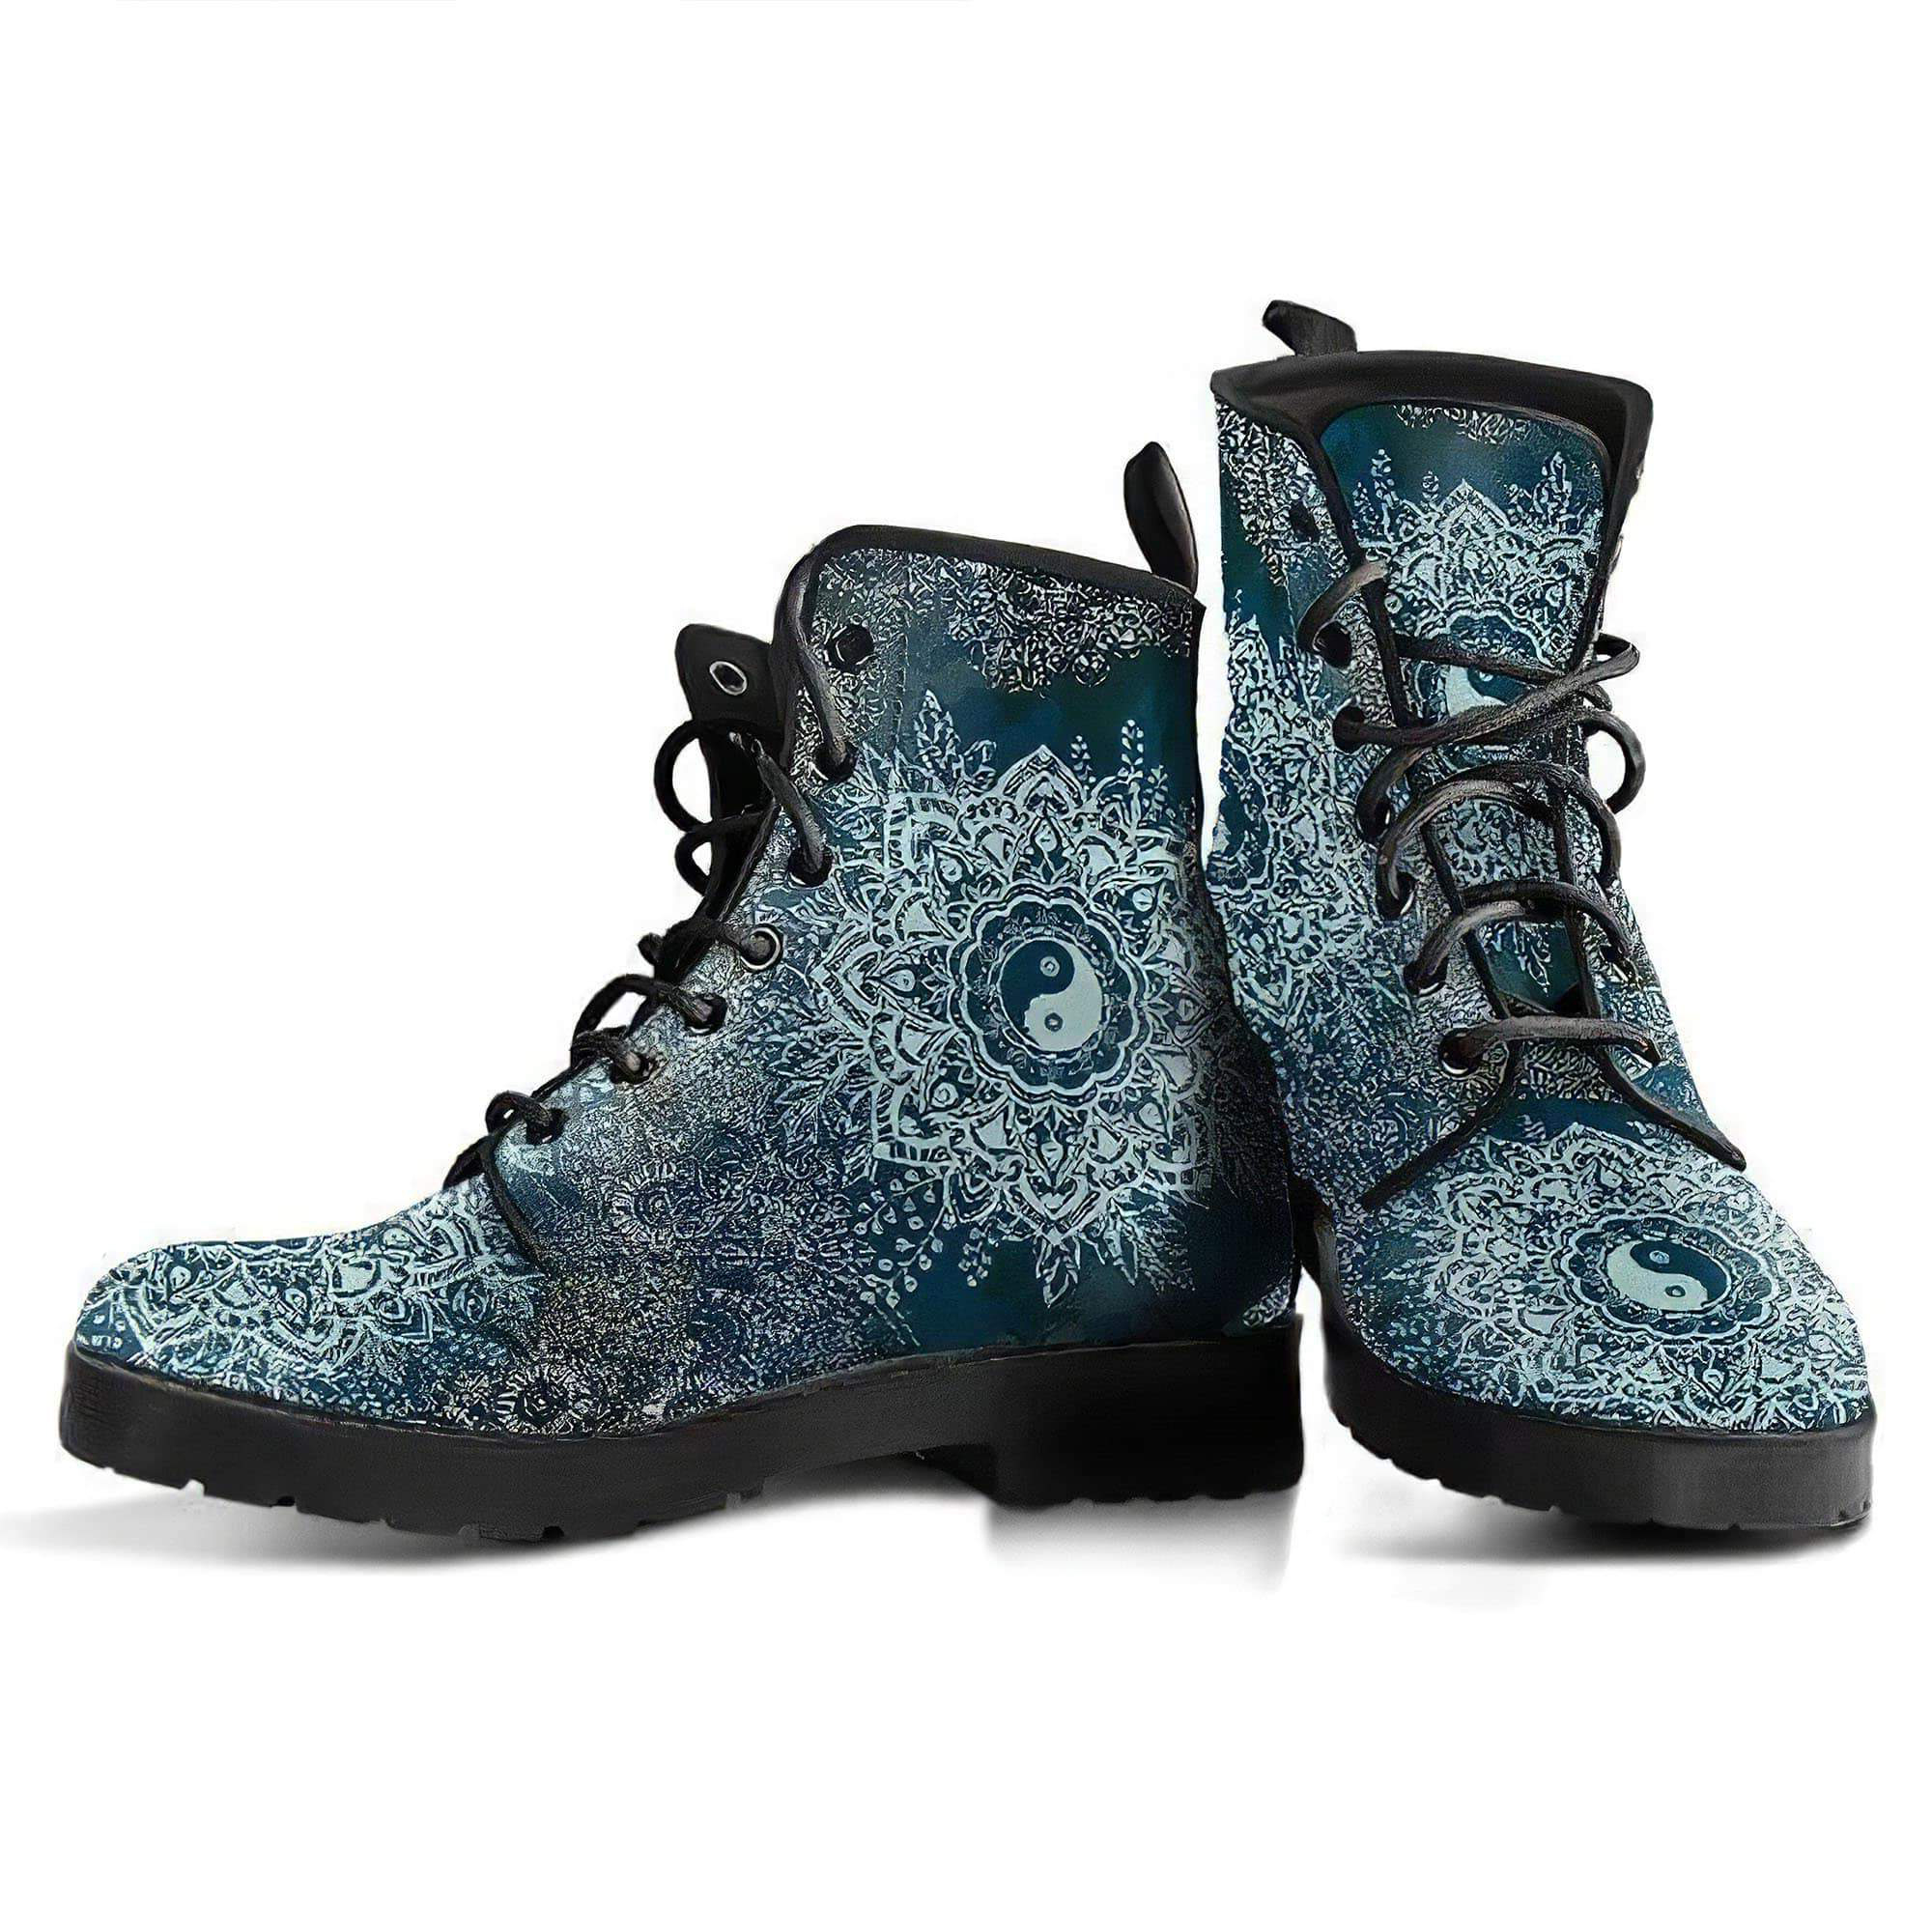 yinyang-lotus-mandala-handcrafted-boots-women-s-leather-boots-12051981041725.jpg